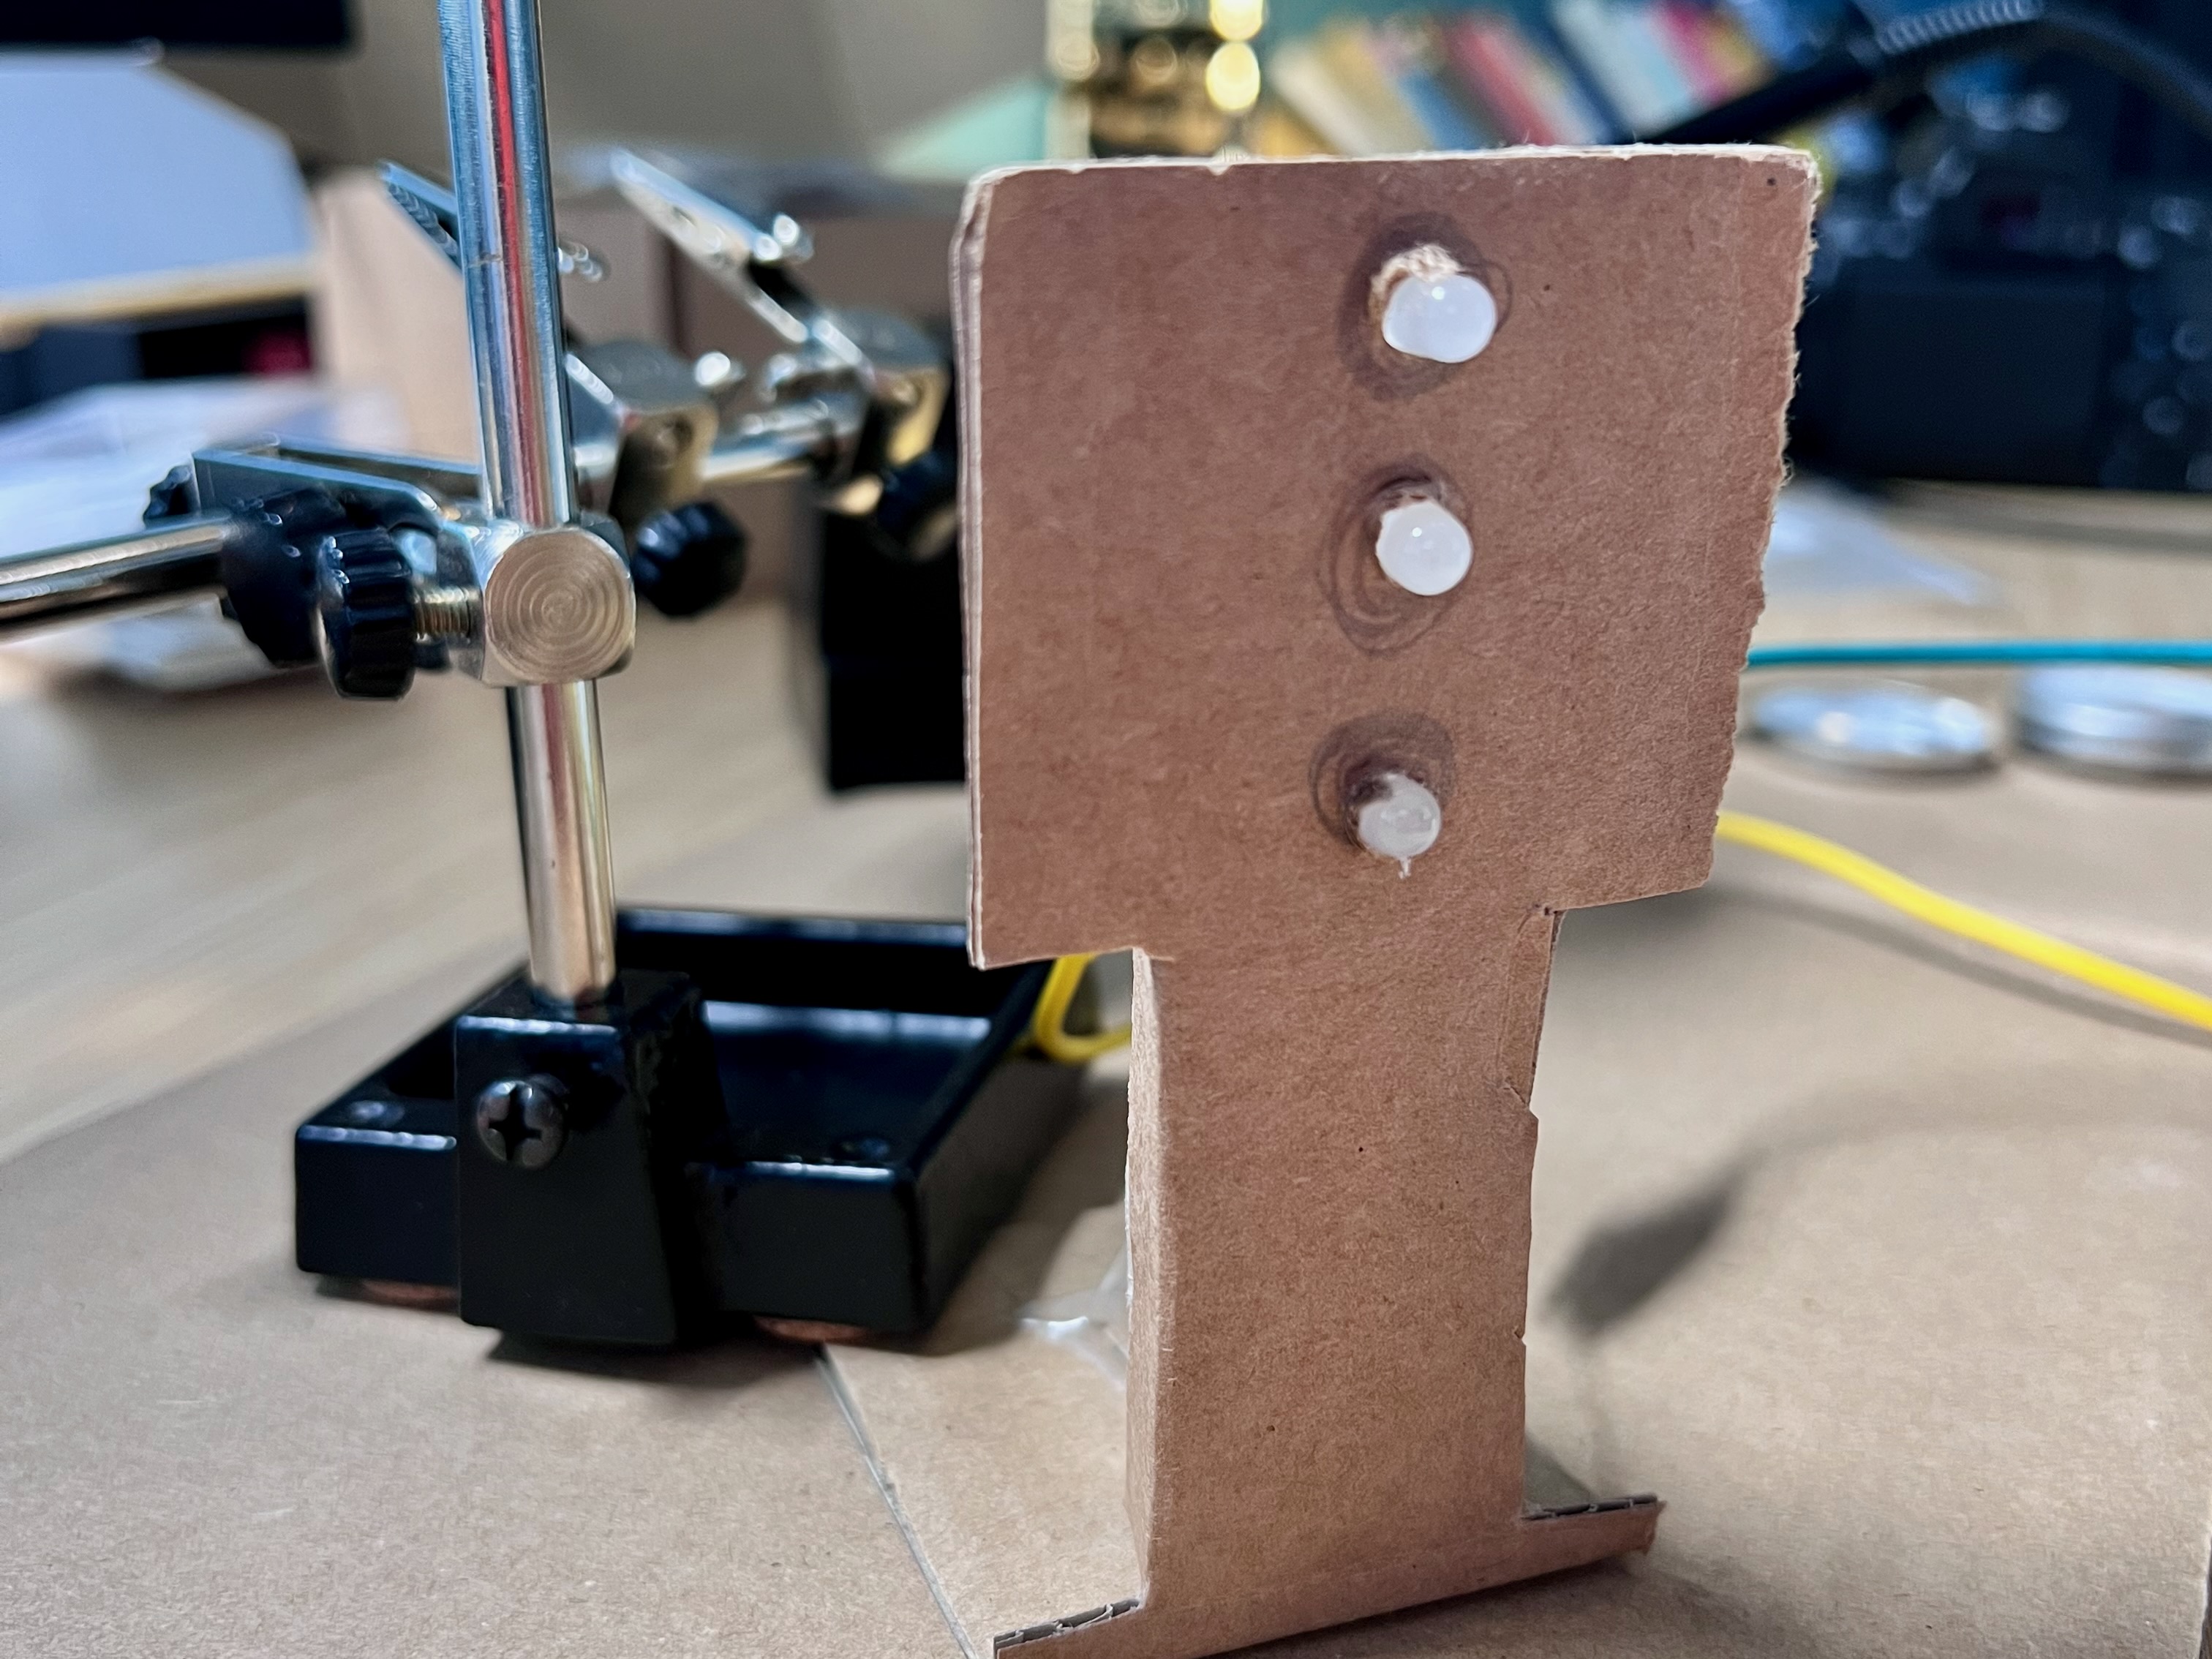 Photo showing a carboard model of a traffic light with three LEDs for the red, amber and green lights. All the LEDs are off.